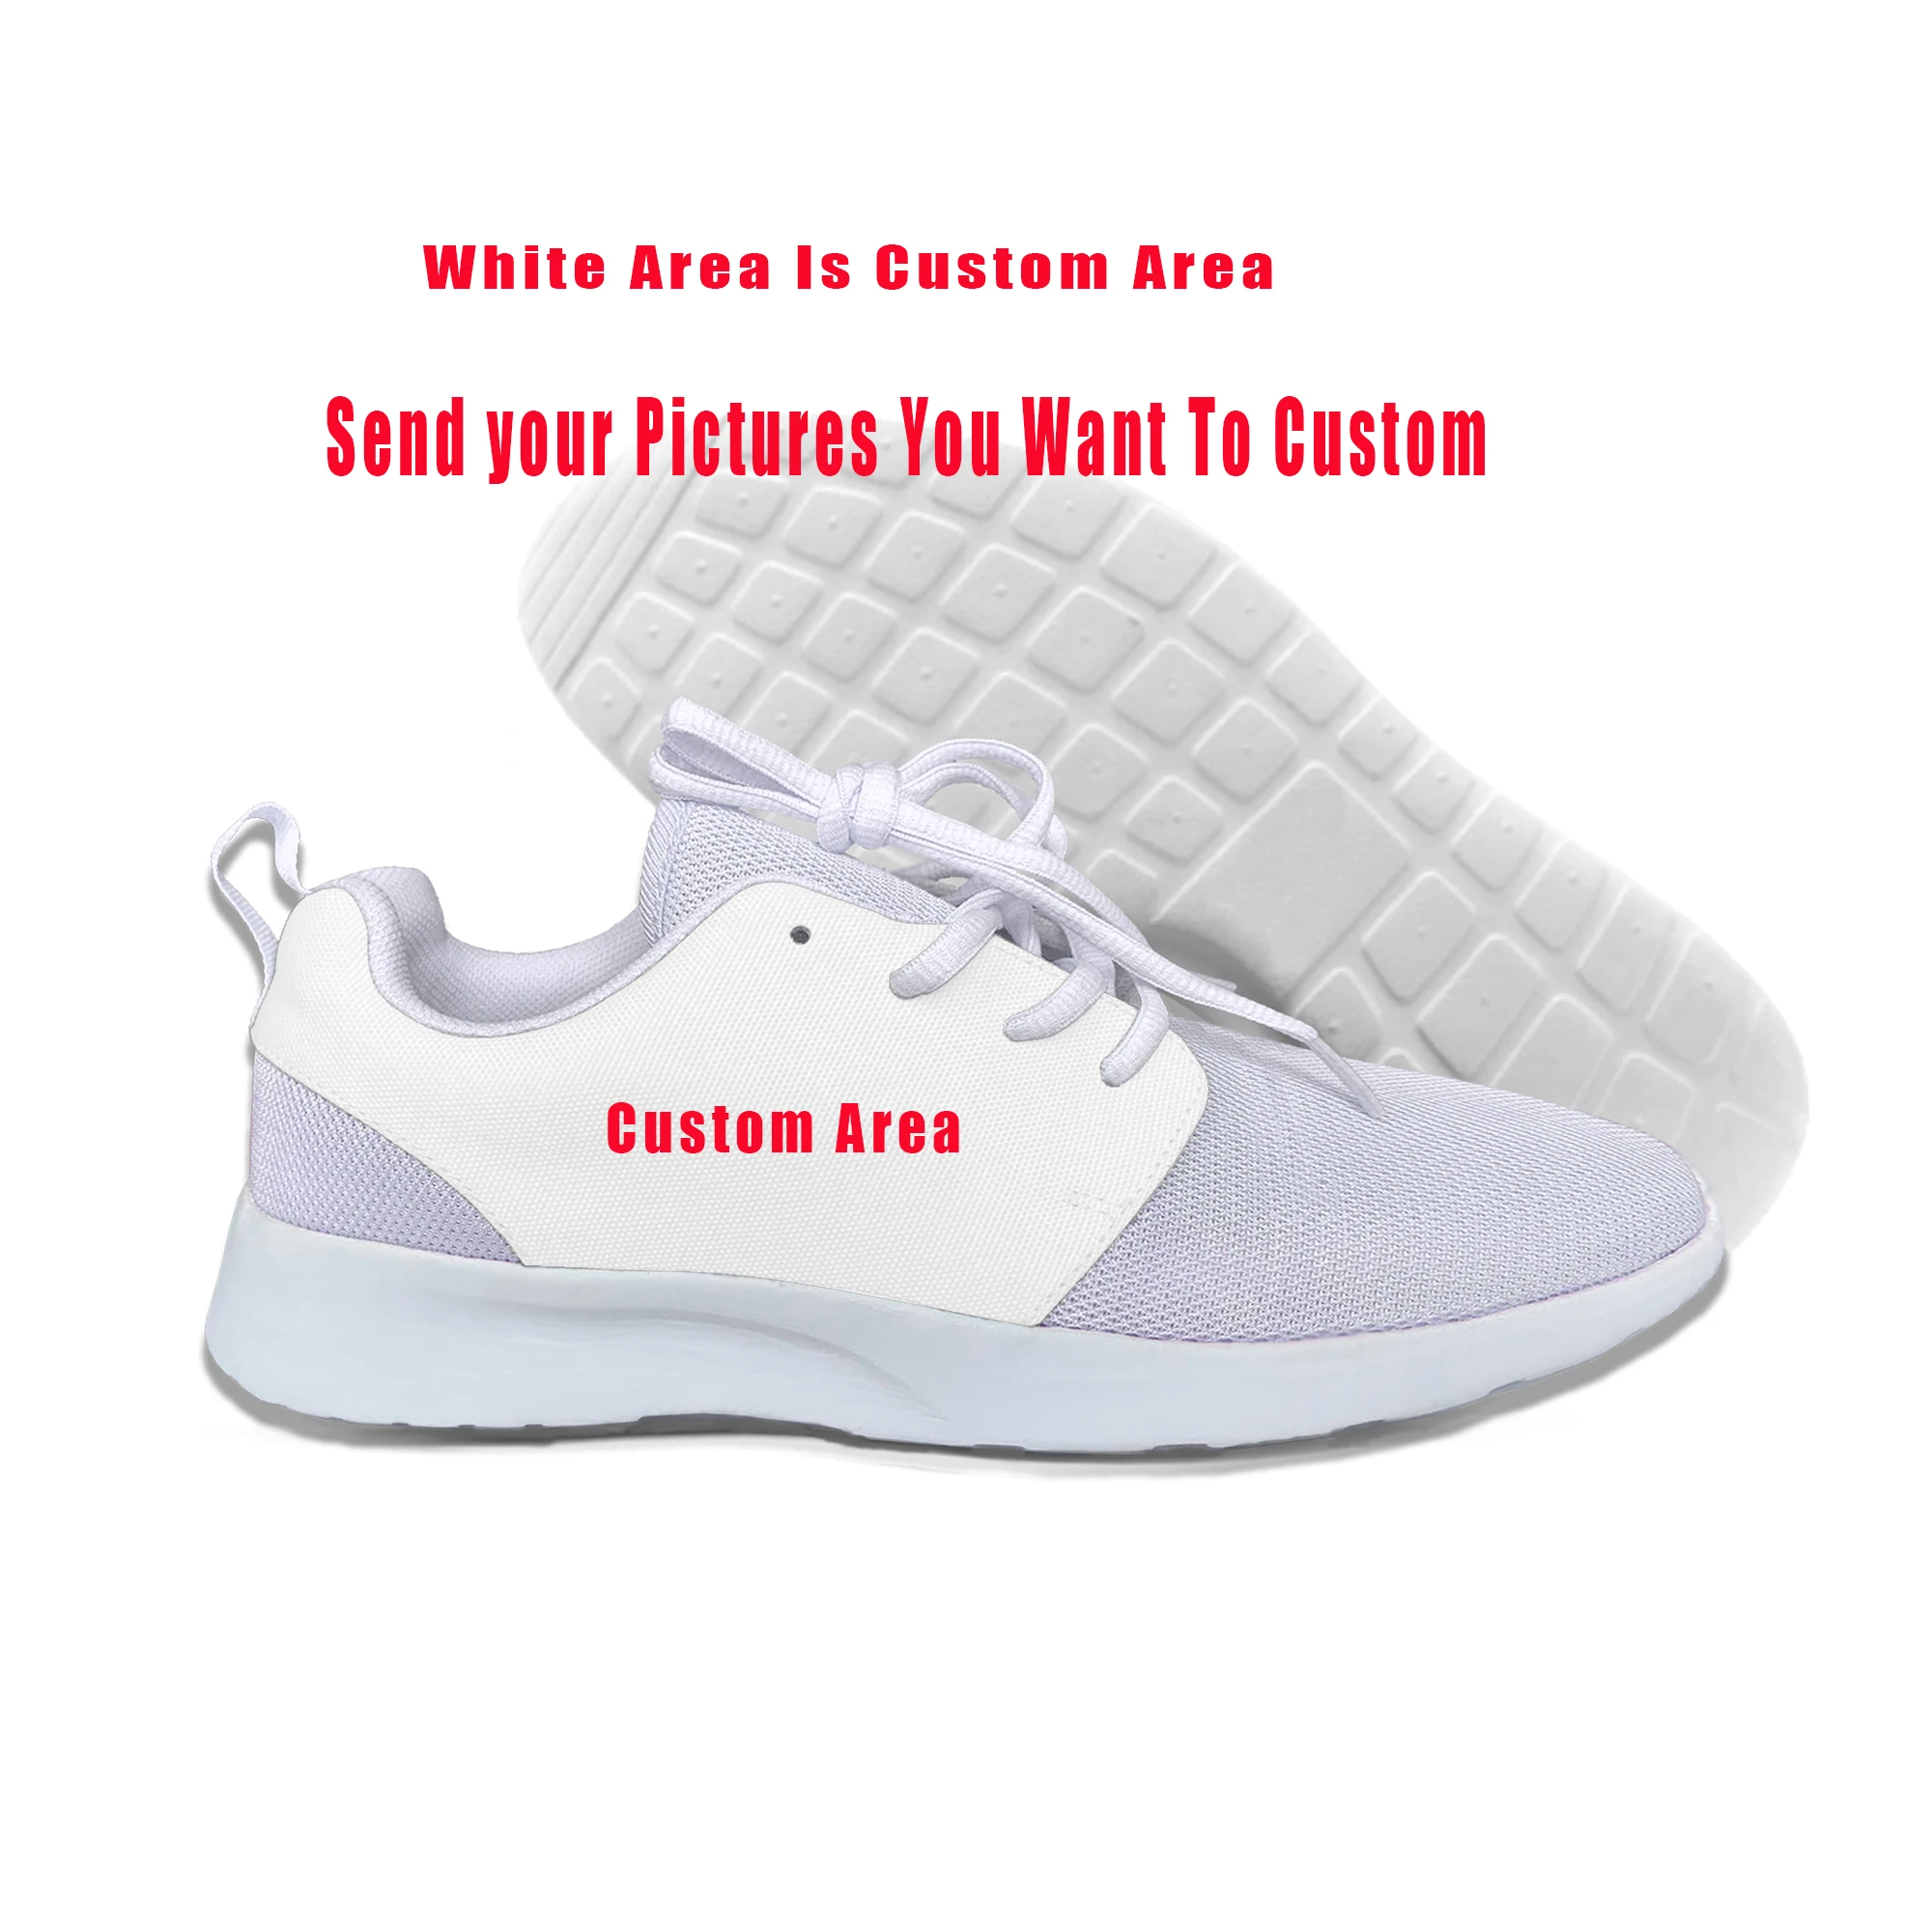 

2019 Hot Cool Fashion Summer Sneakers Handiness Casual Shoes 3D Printed Cartoon Cute Funny For Men Women Frankenweenie